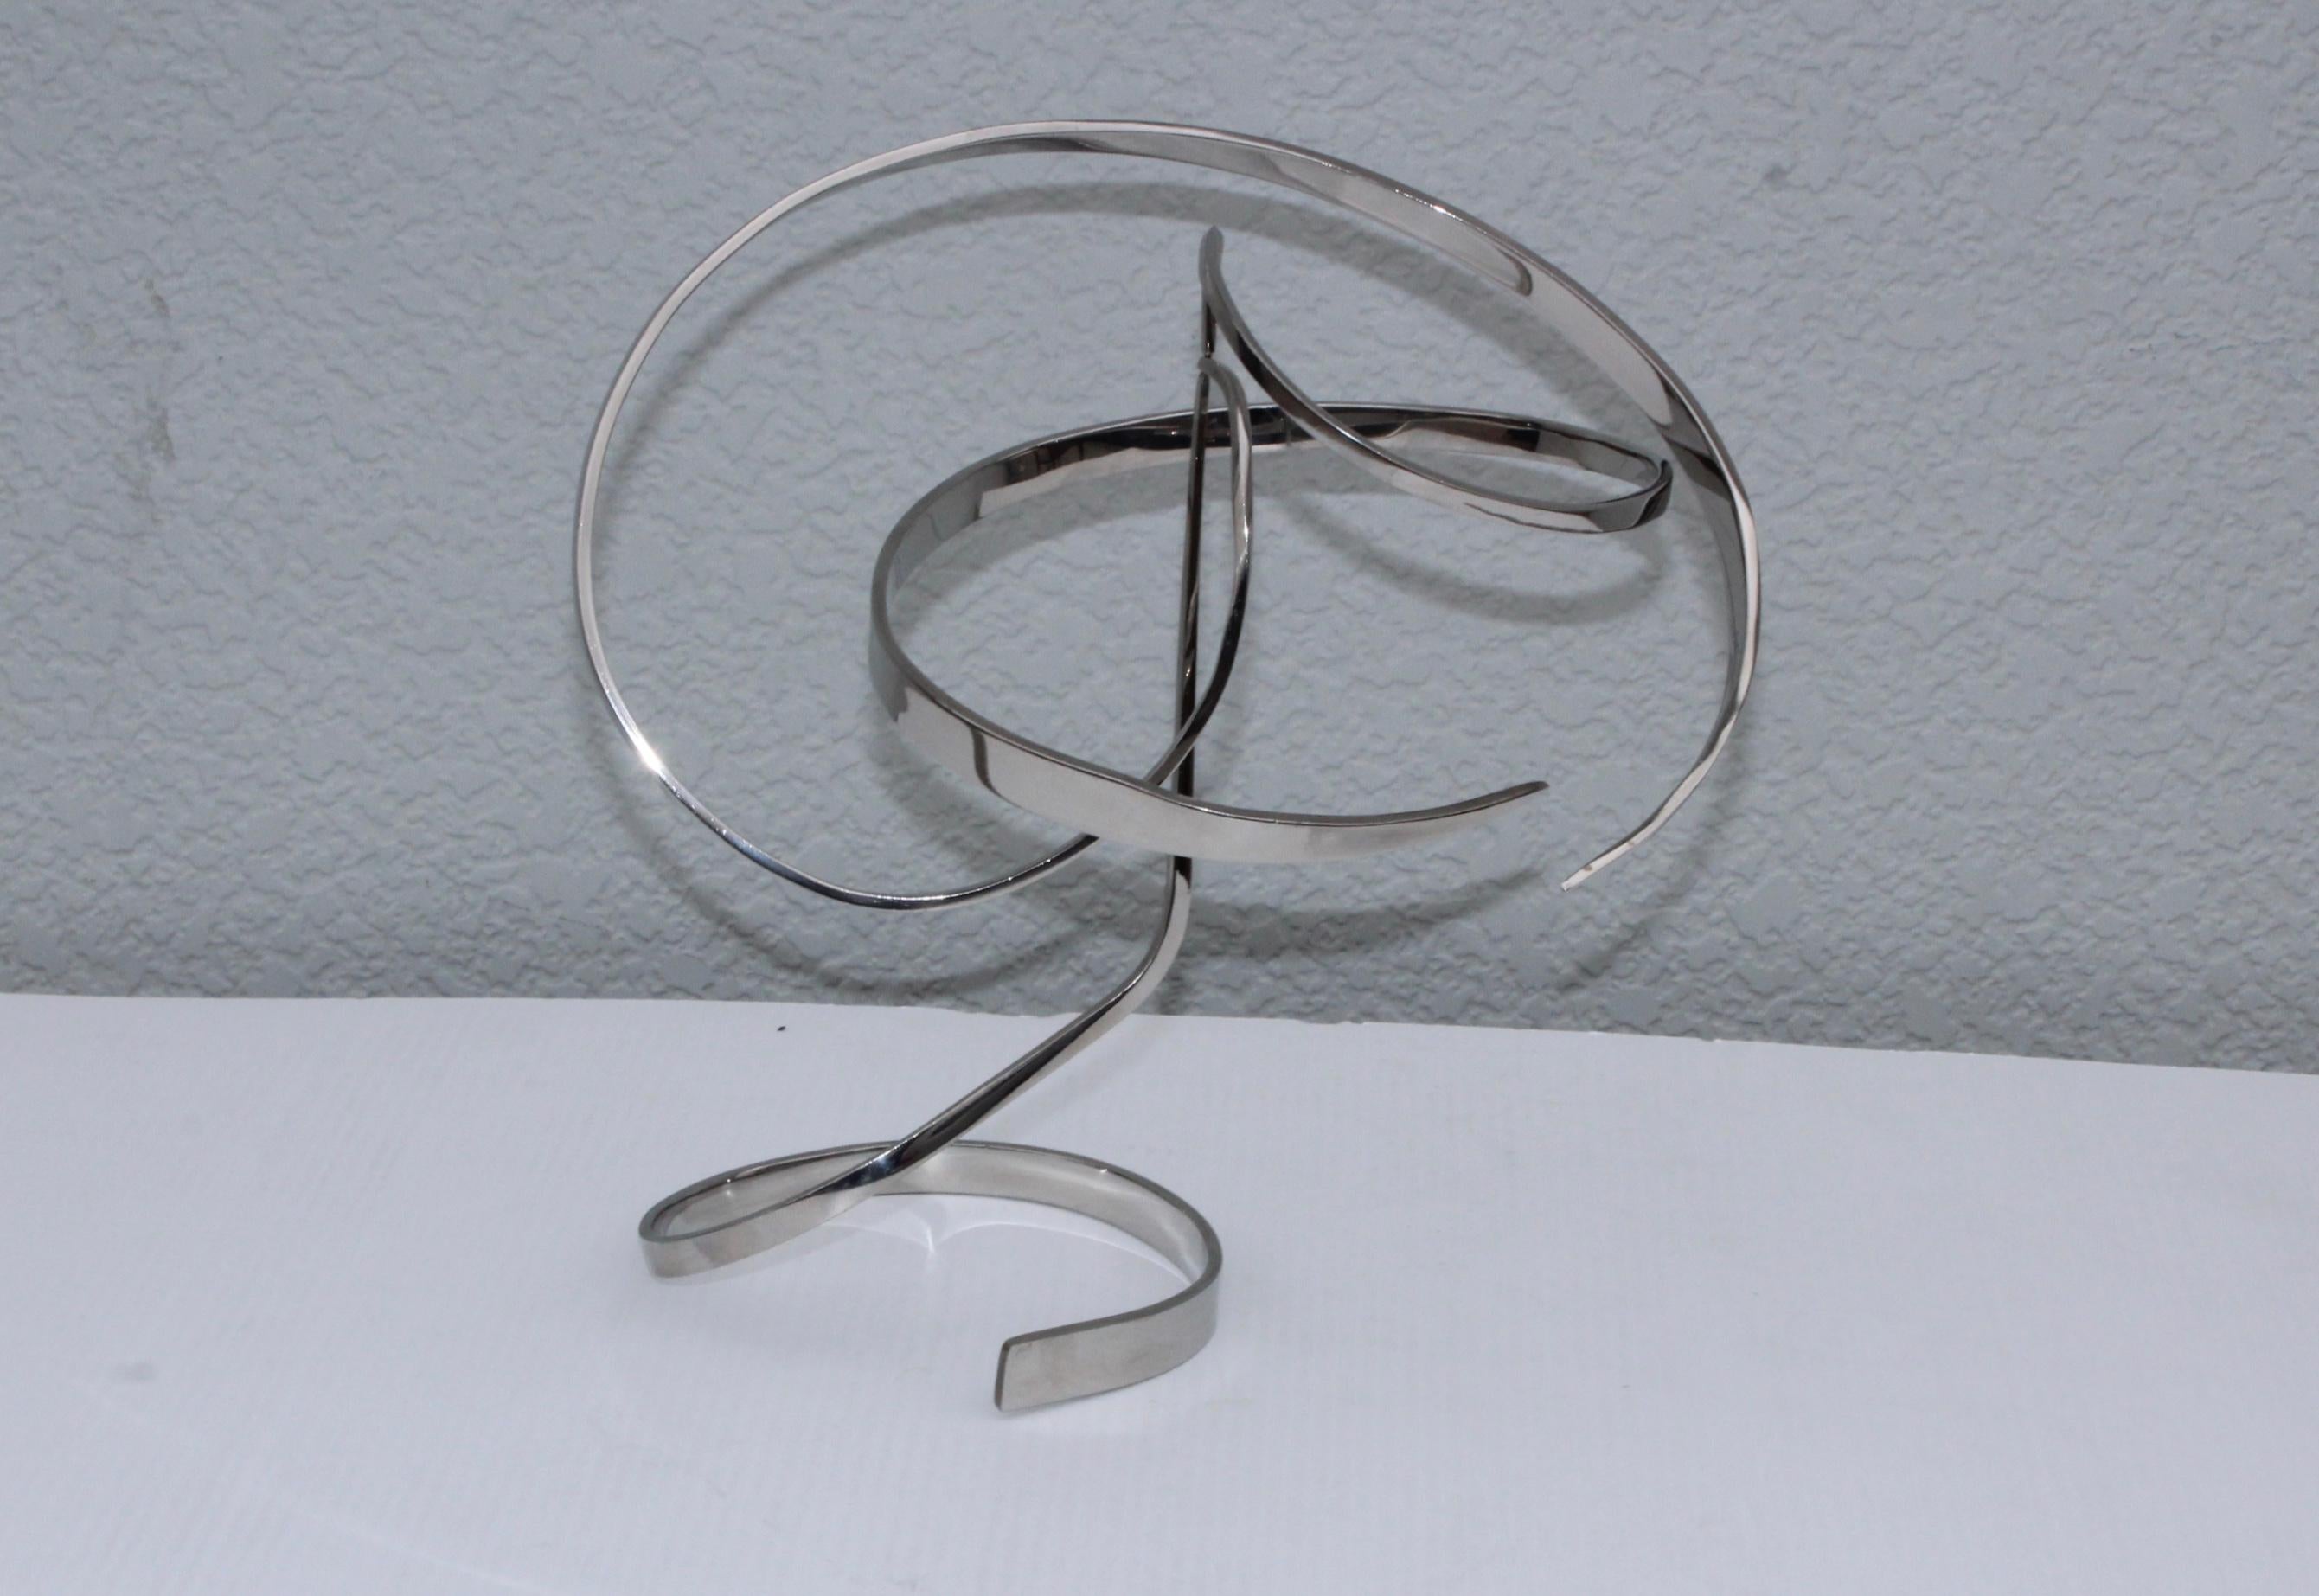 Stunning 1980s standing kinetic sculpture by Michael Cutler. Signed and dated 